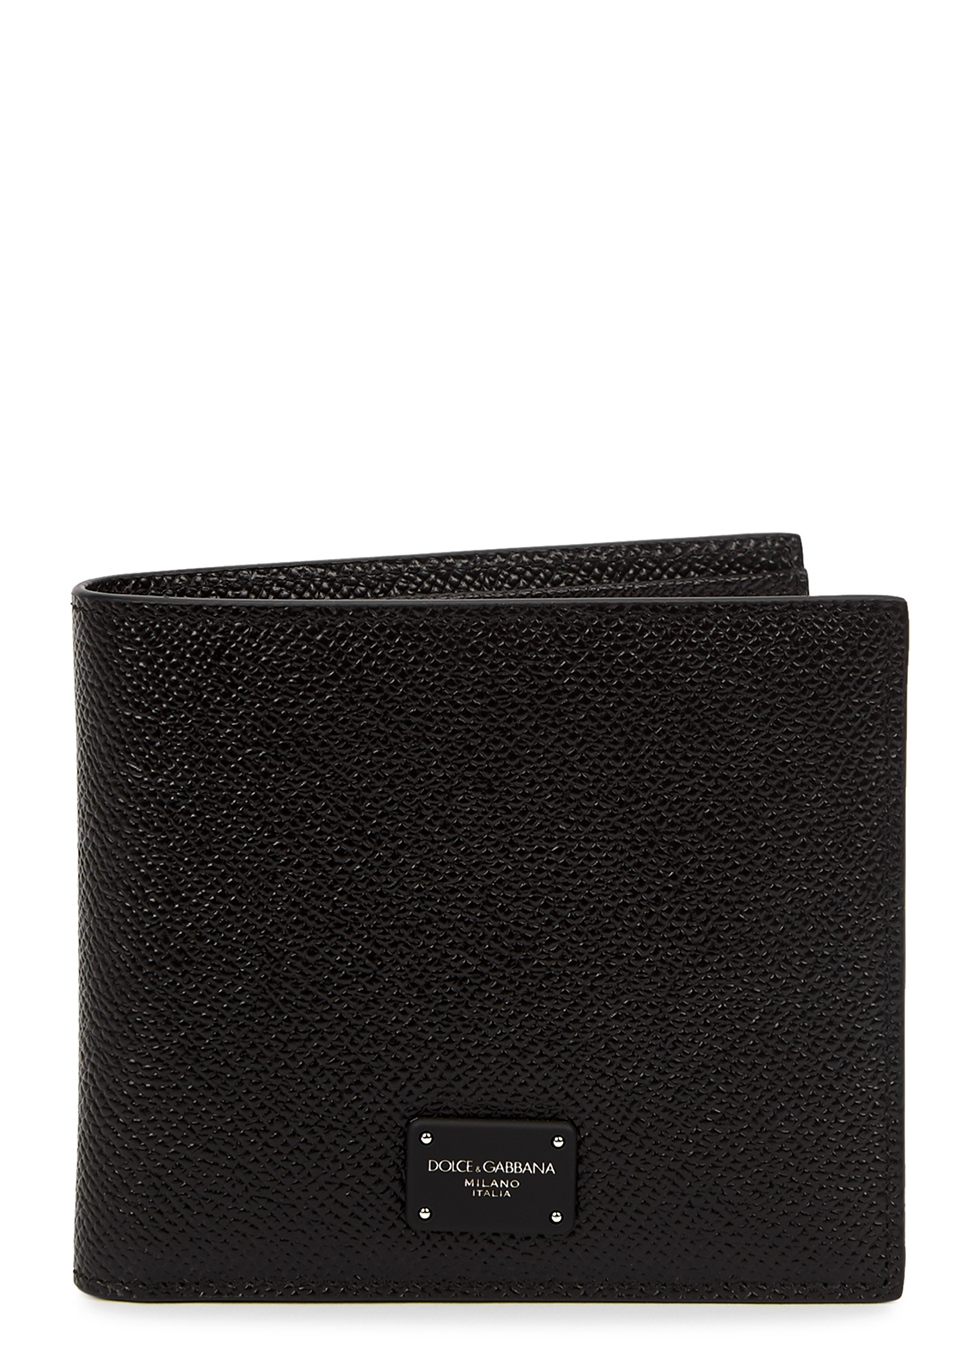 Dolce & Gabbana Leather Wallet in Black for Men Mens Accessories Wallets and cardholders 